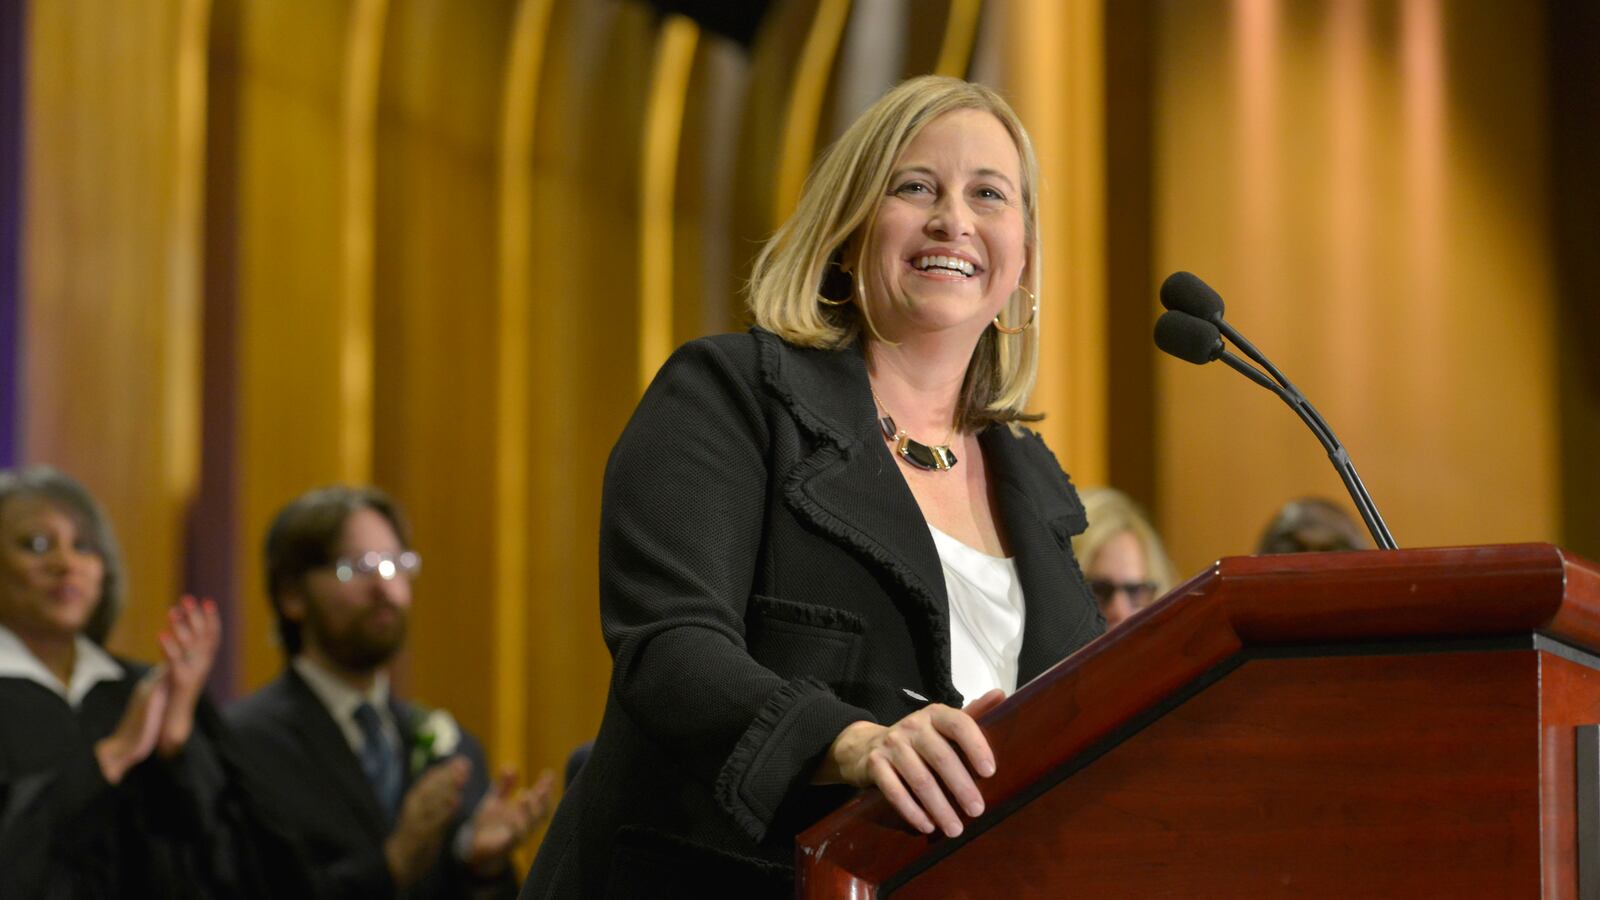 Megan Barry delivers her inaugural address on Sept. 25 as Nashville's new mayor. Improved public education was one of her top campaign promises.